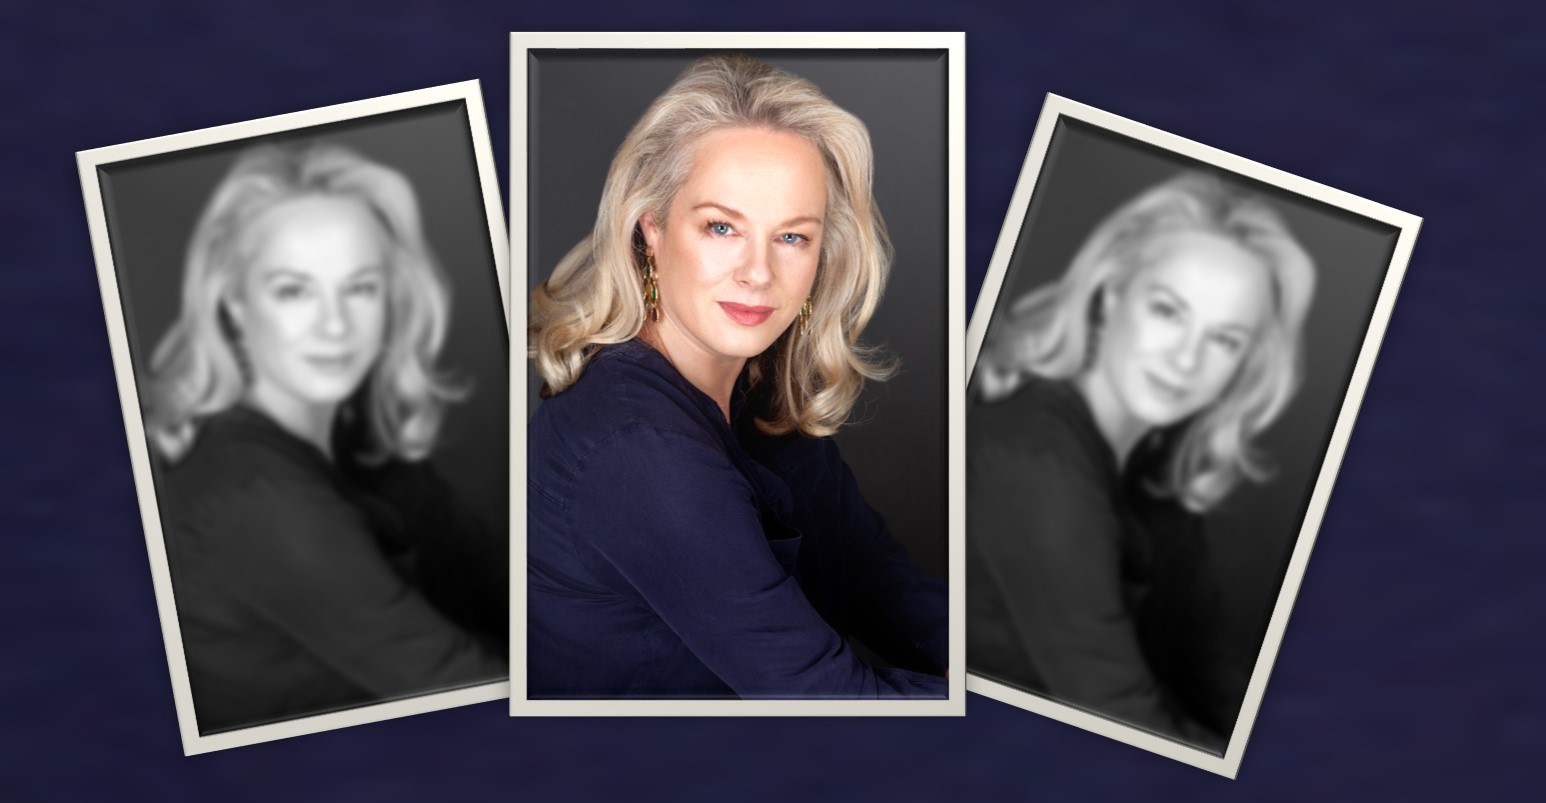 Three images of Tanya Kempston, left and right in blurred black and white and in the middle in full colour.